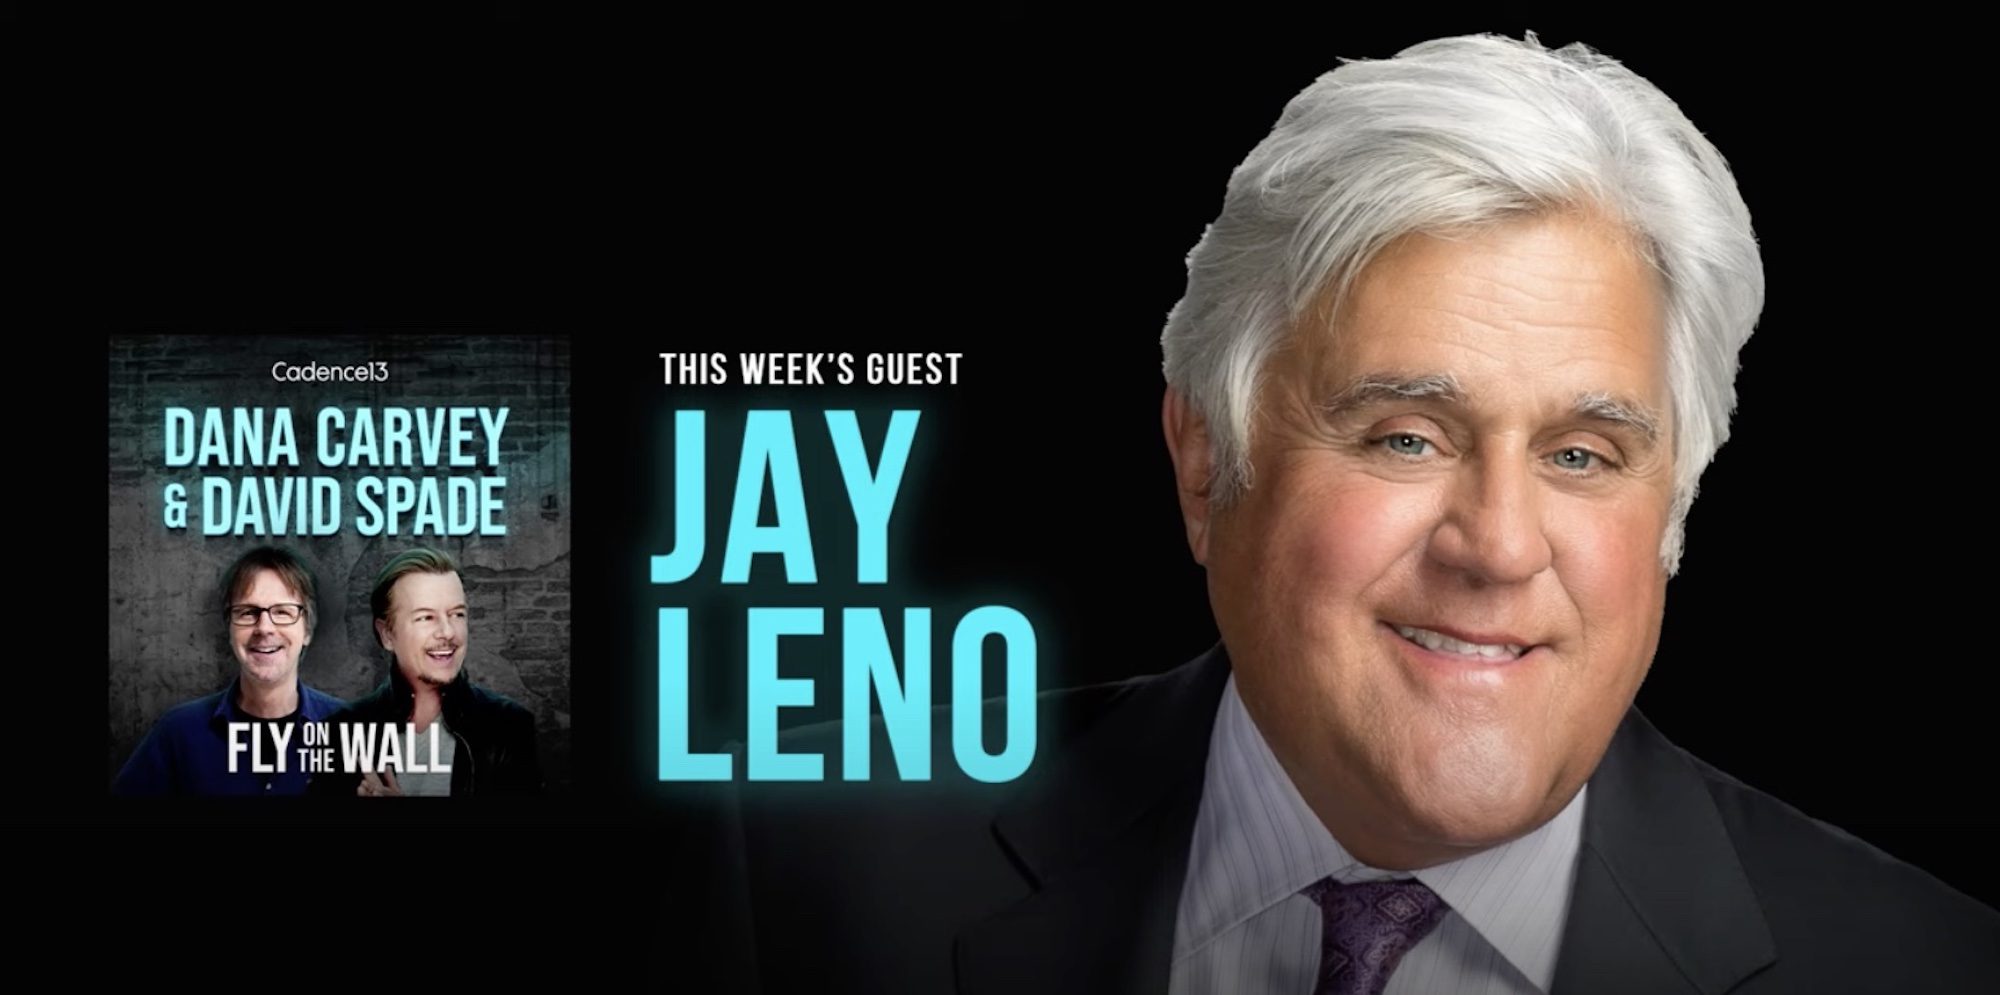 Ladies and gentlemen, Jay Leno. Media sourced from Youtube.